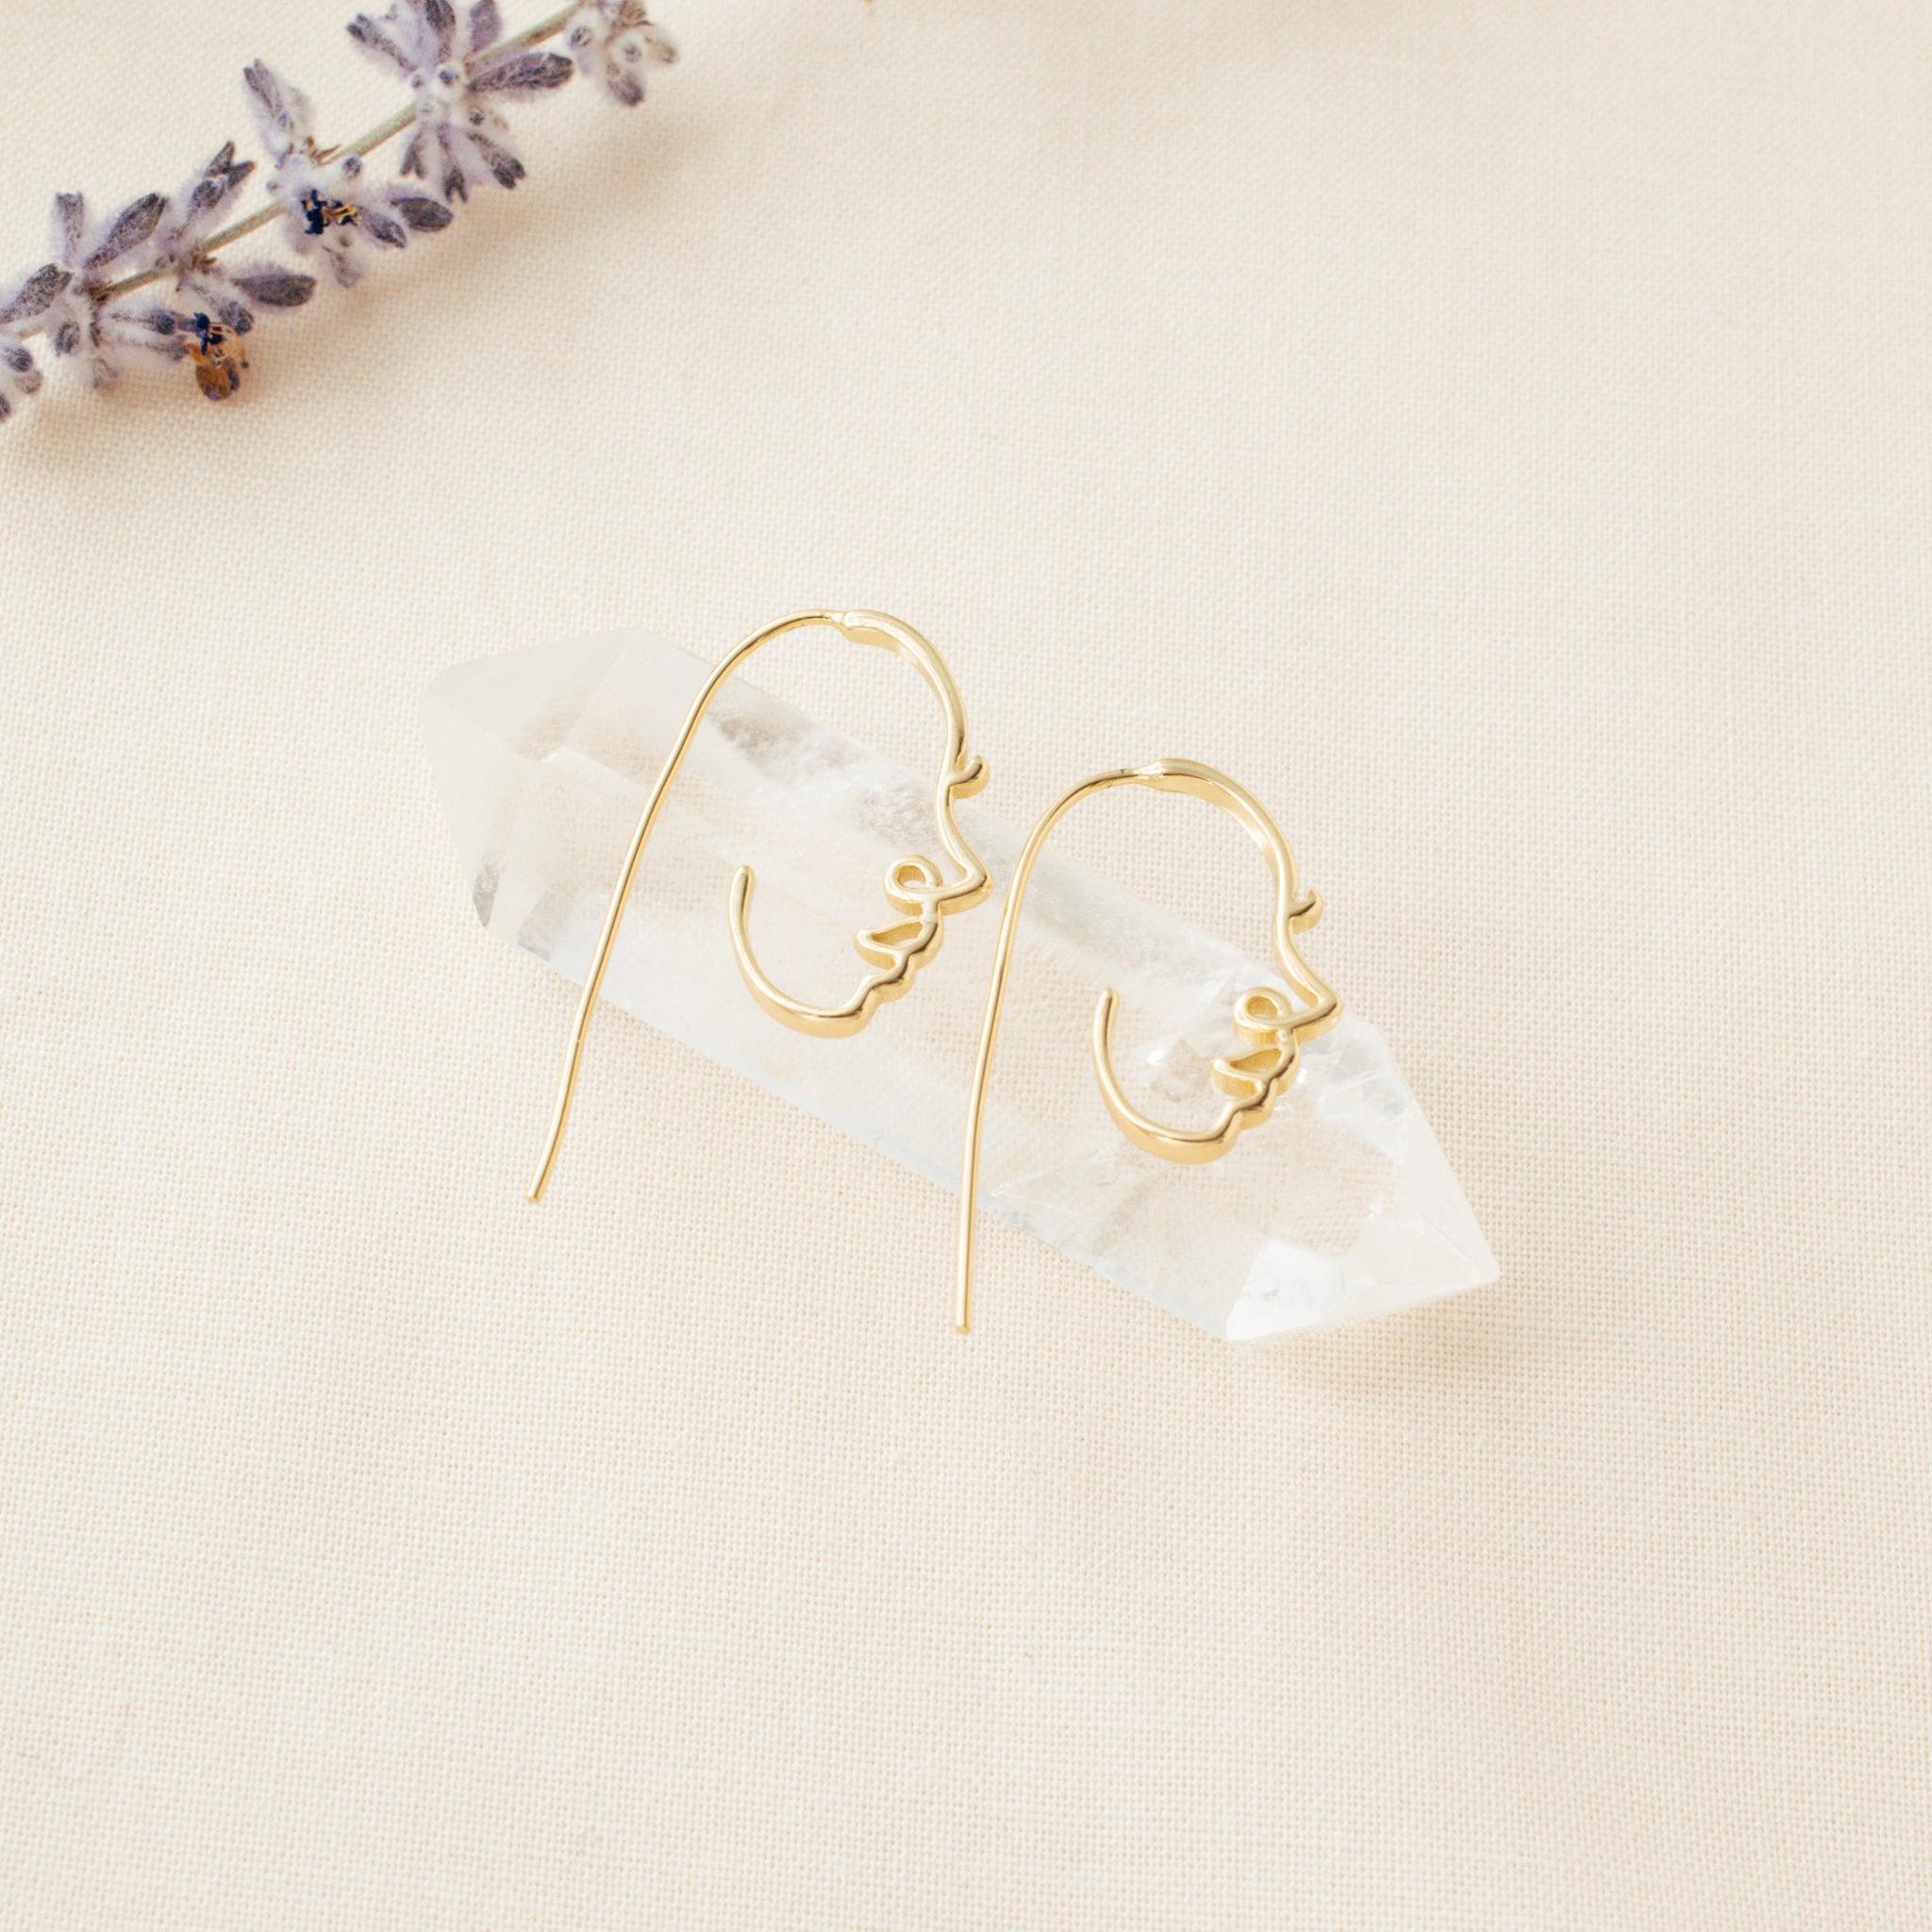 Face earrings on a clear crystal on a cream background